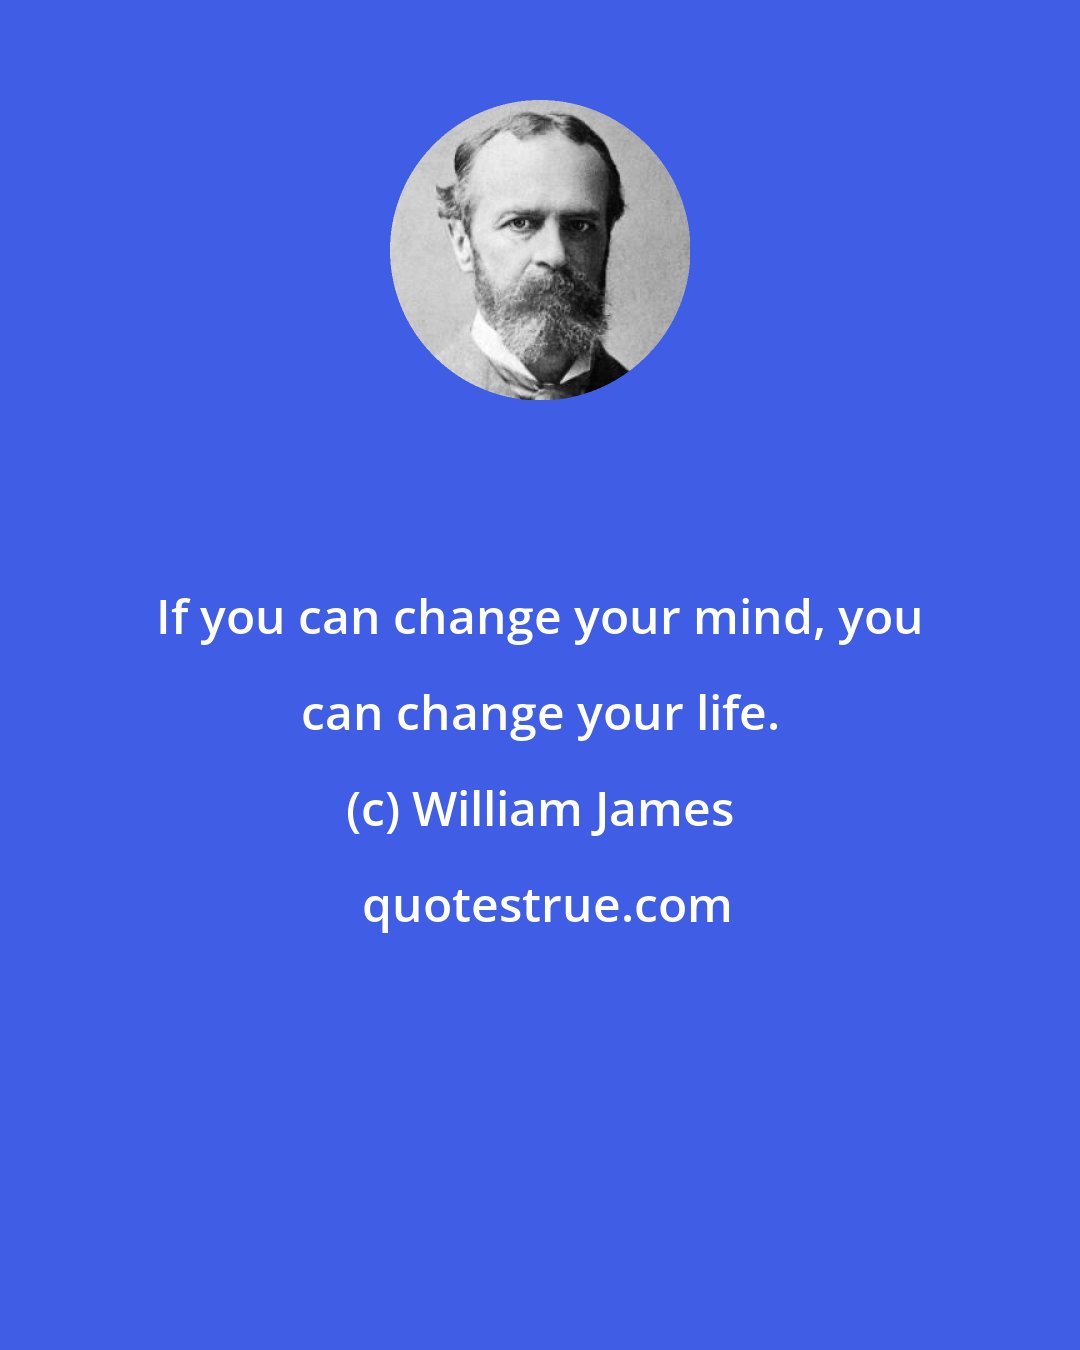 William James: If you can change your mind, you can change your life.